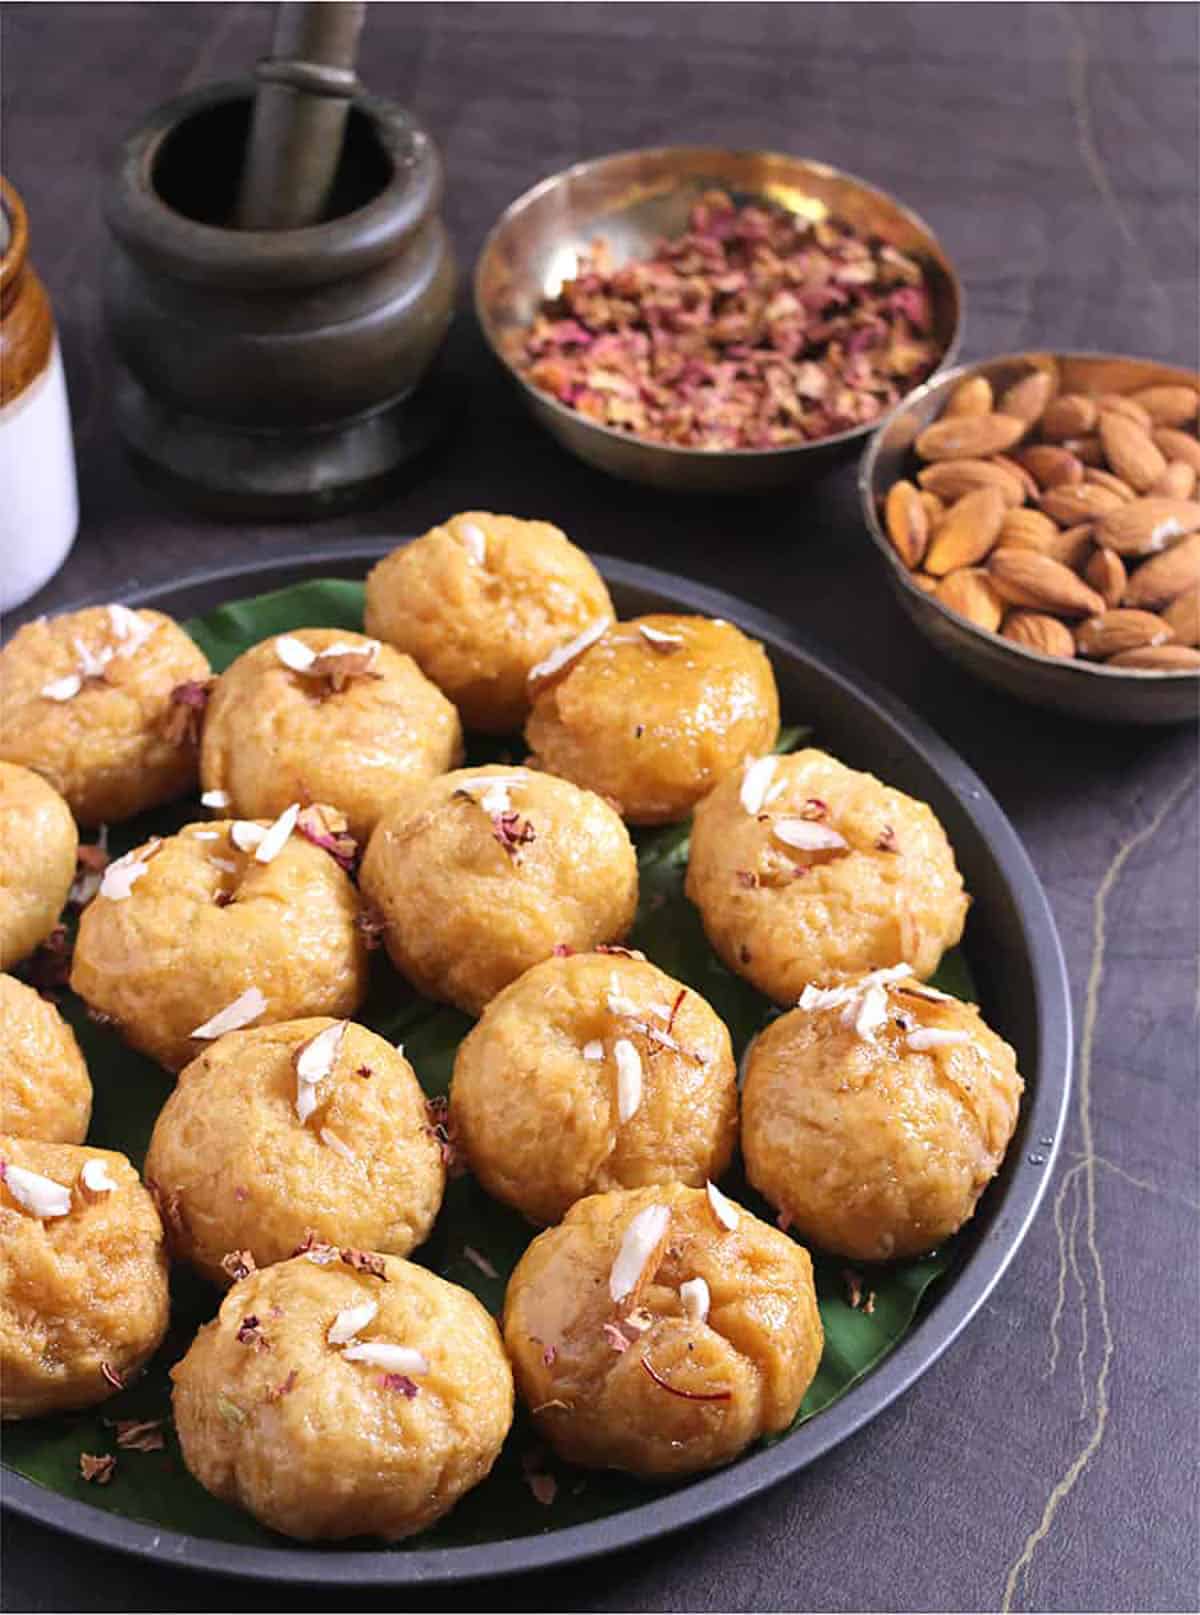 Homemade balushahi arranged on serving plate garnished with nuts to make it look festive for Diwali, Navratri 